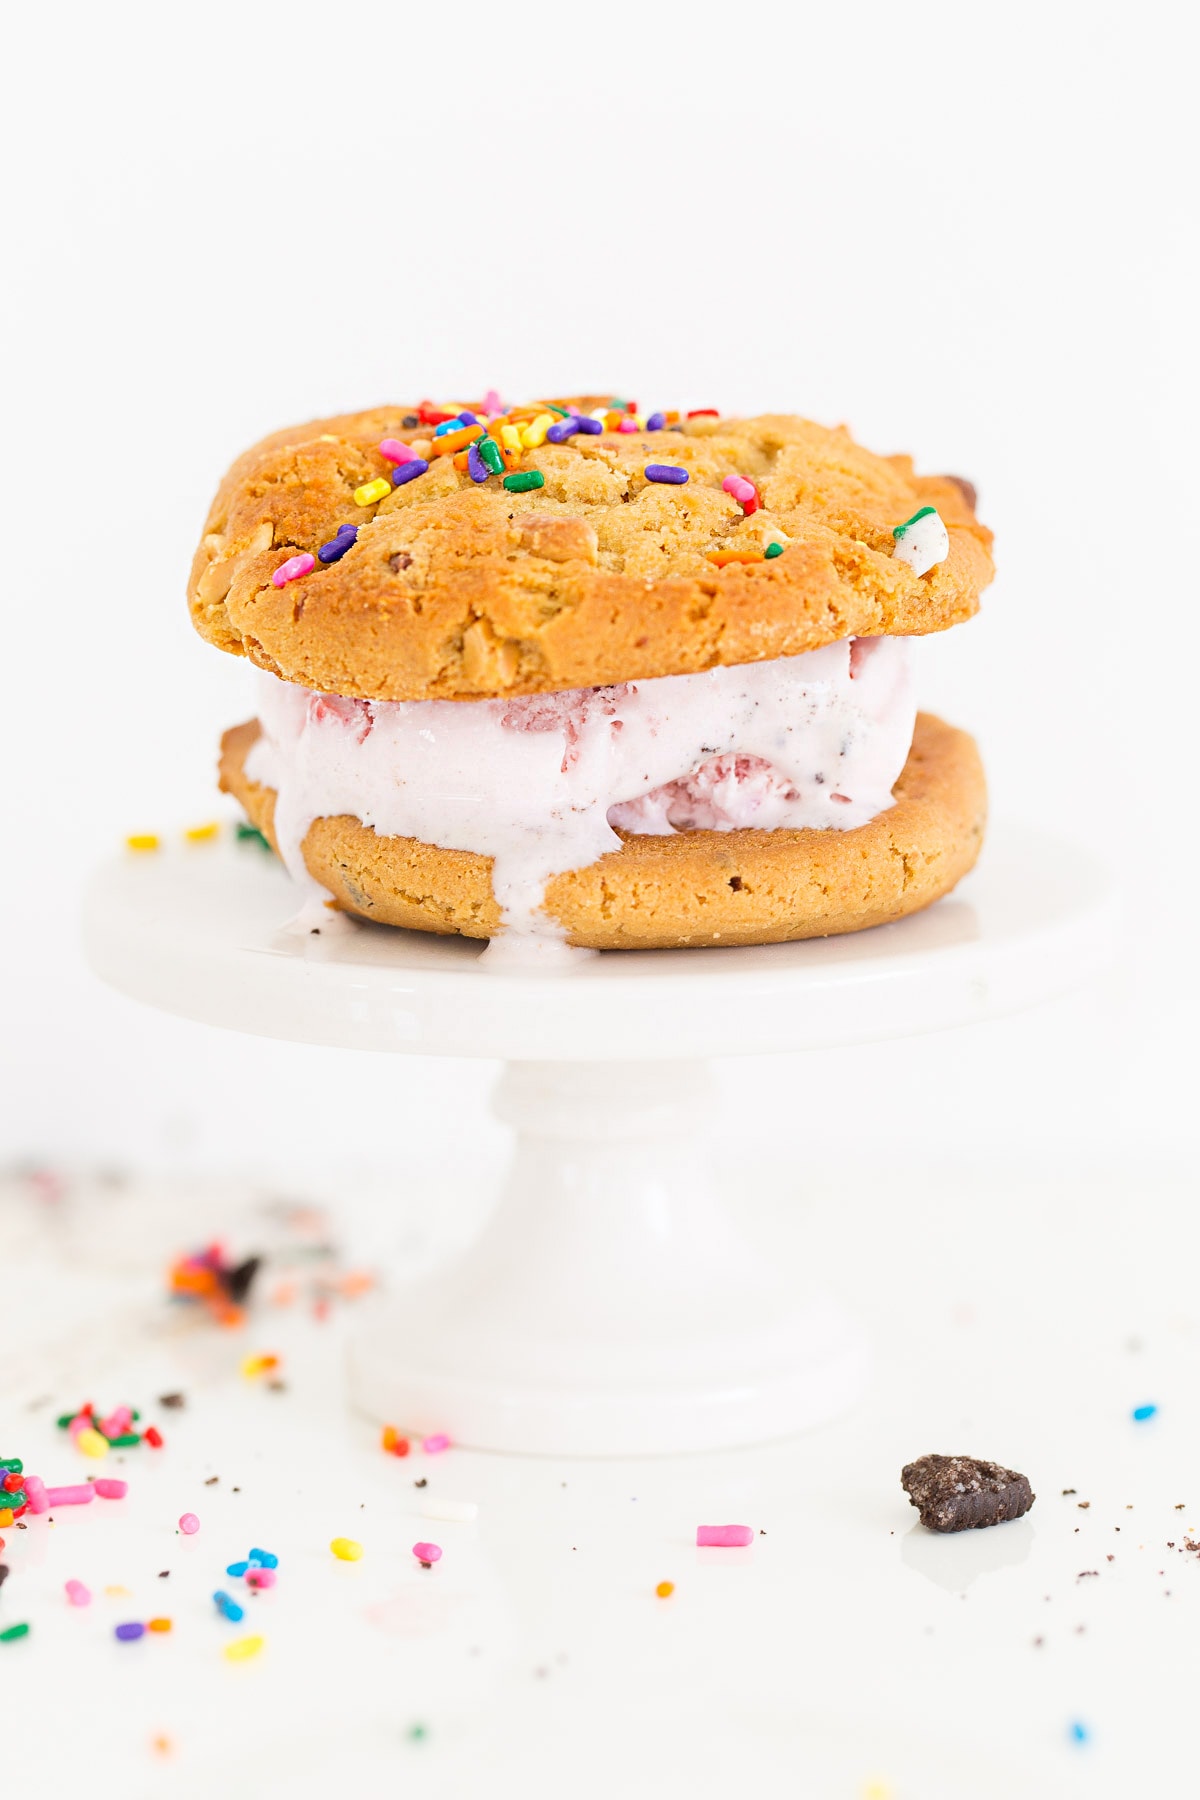 We all scream for warm cookie ice cream sandwiches, am I right?! Download these free printable ice cream postcard invitations by Sugar & Cloth for Baskin-Robbins